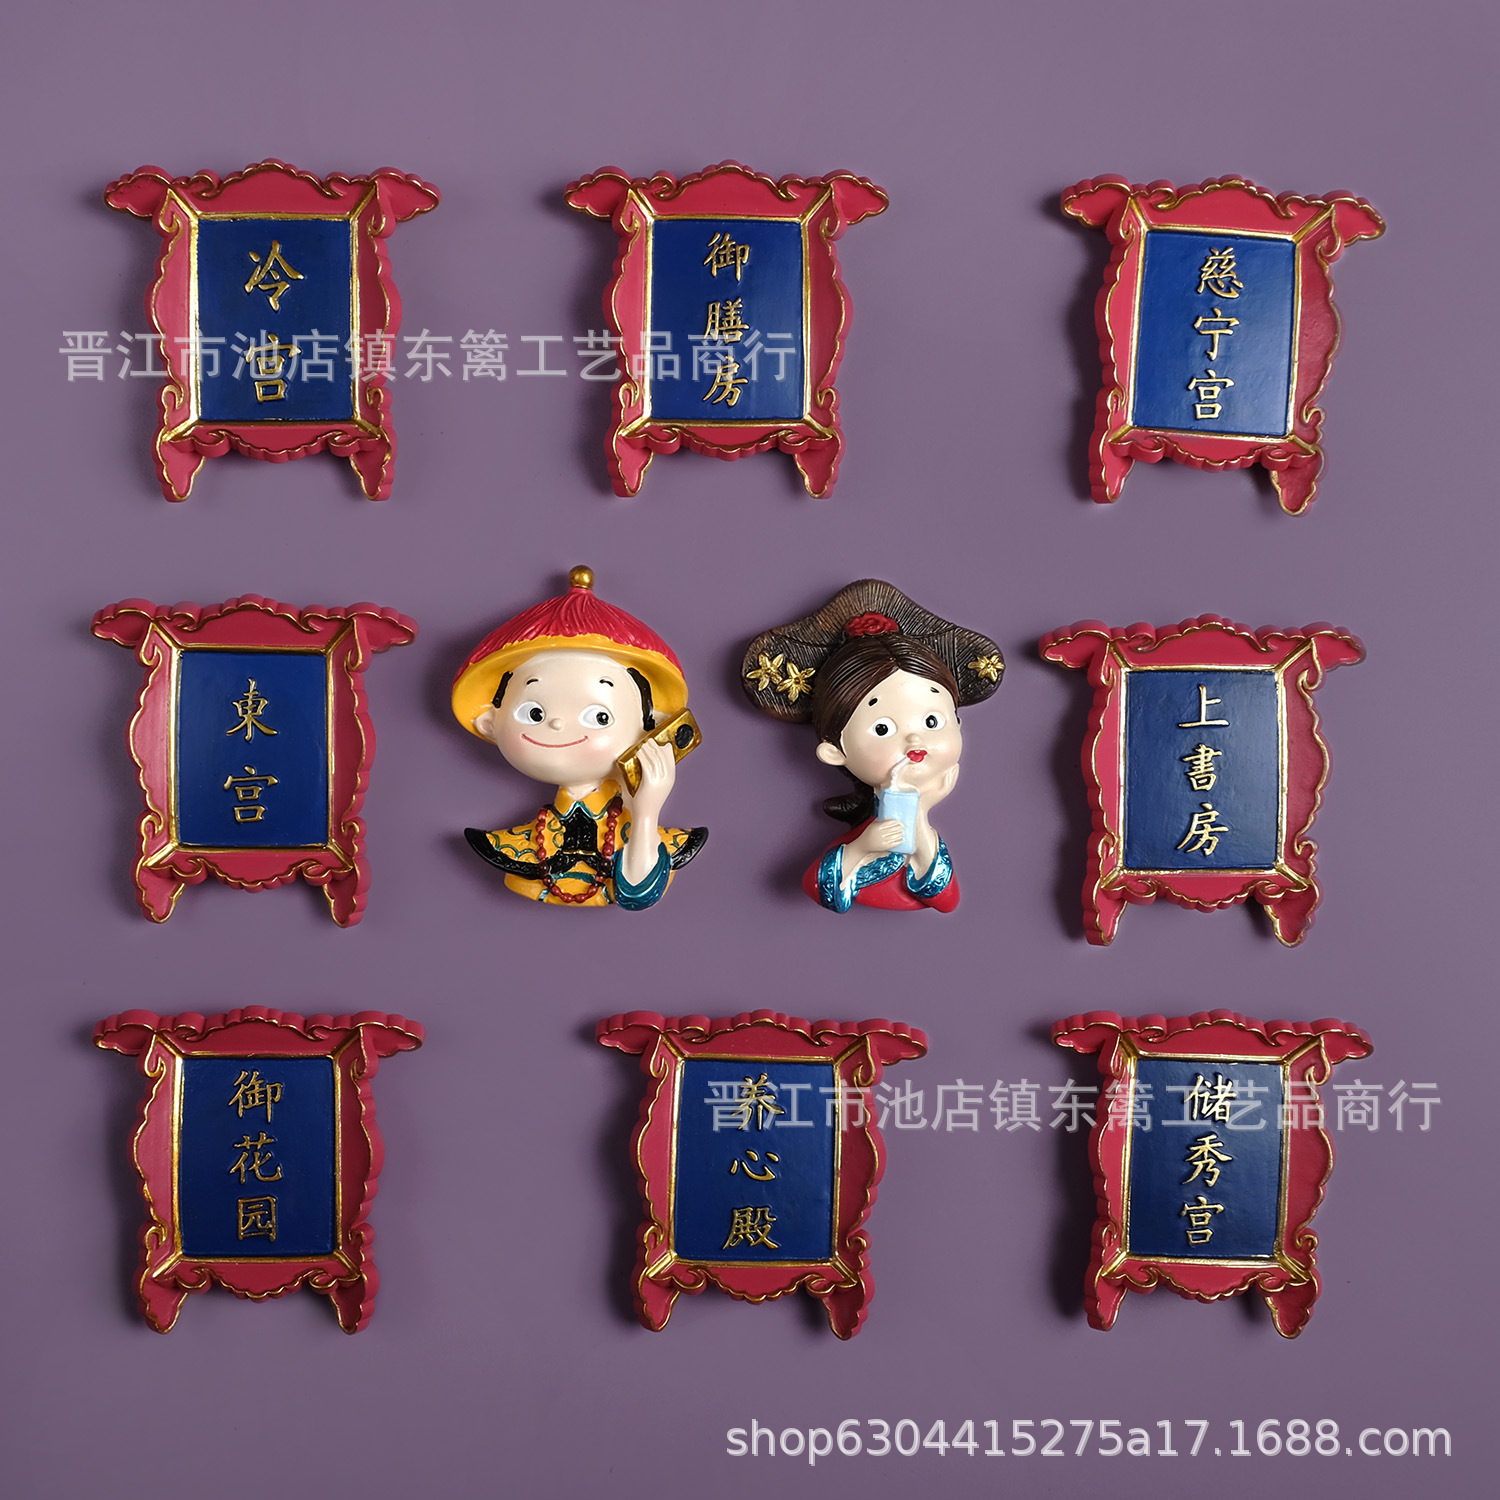 palace museum plaque refrigerator sticker and magnet sticker cultural creation beijing city cold palace creative royal house court magnetic sticker magnet